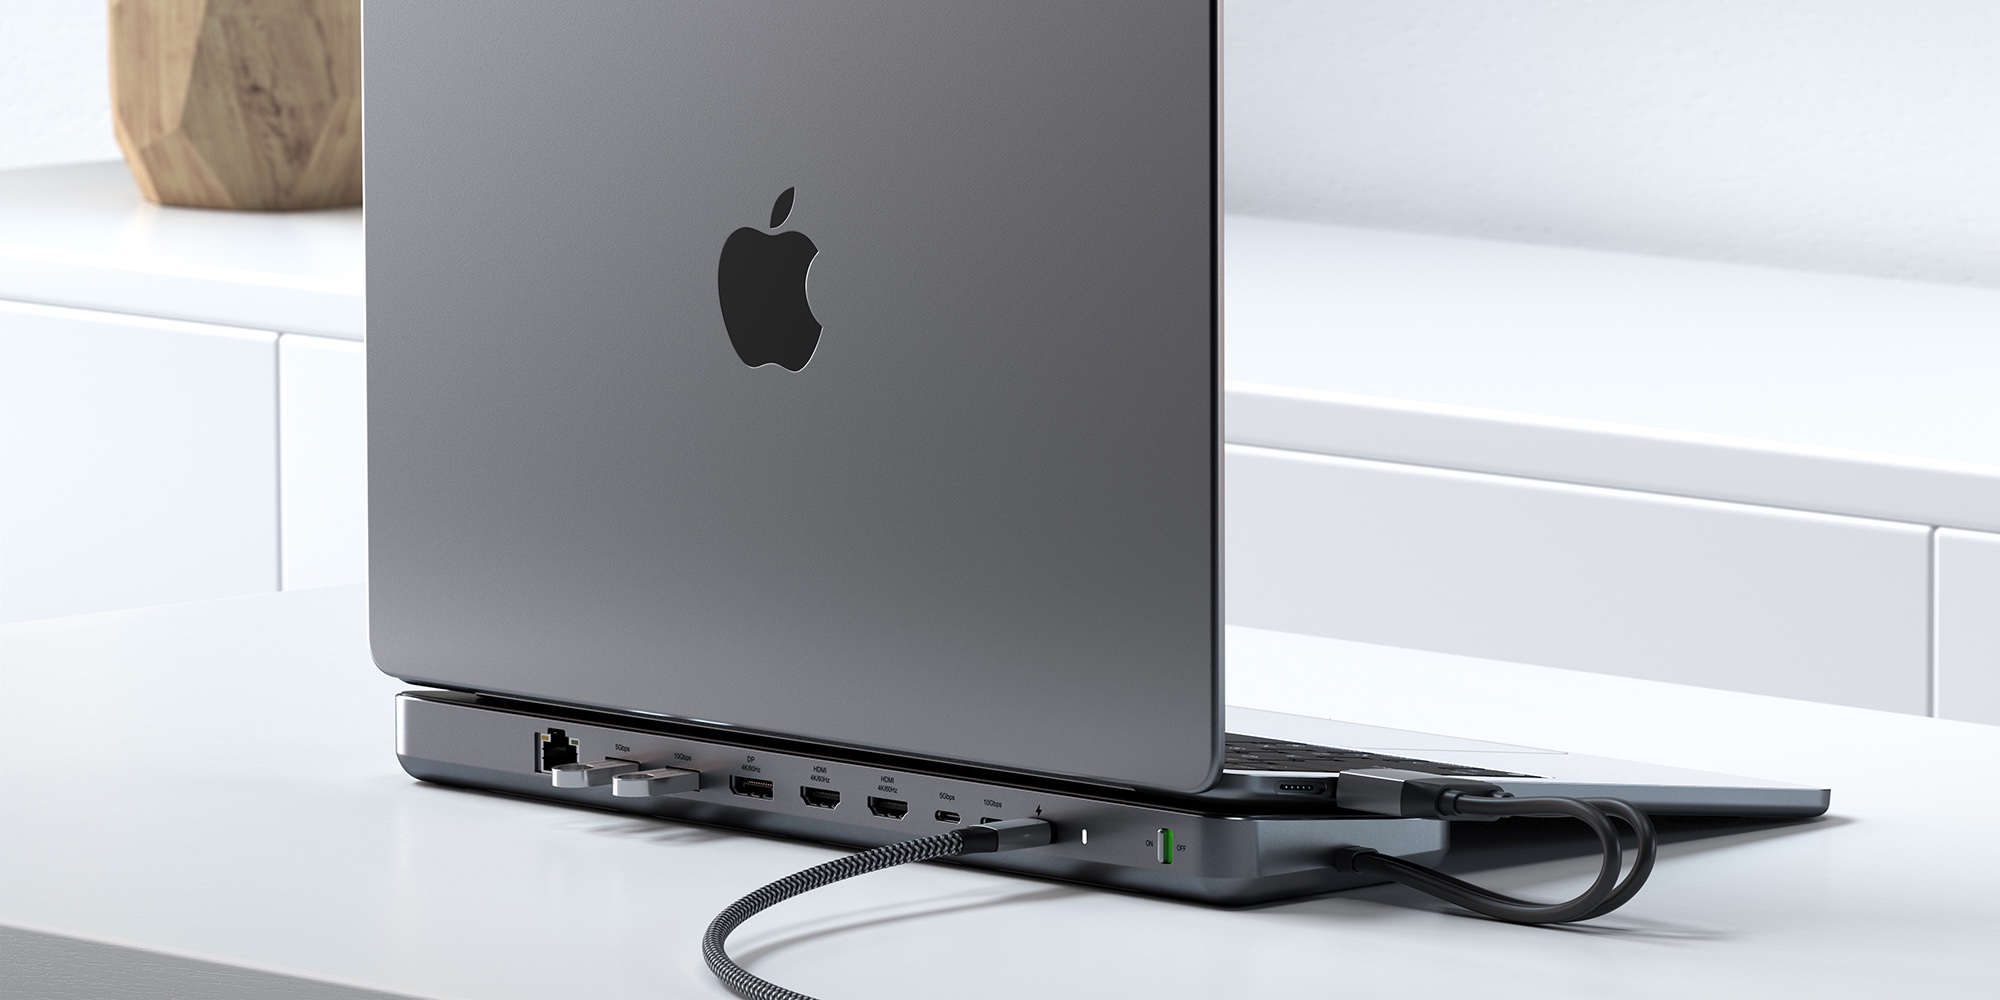 Satechi USB-C Hybrid Multiport Adapter review: USB-C dock can house an SSD